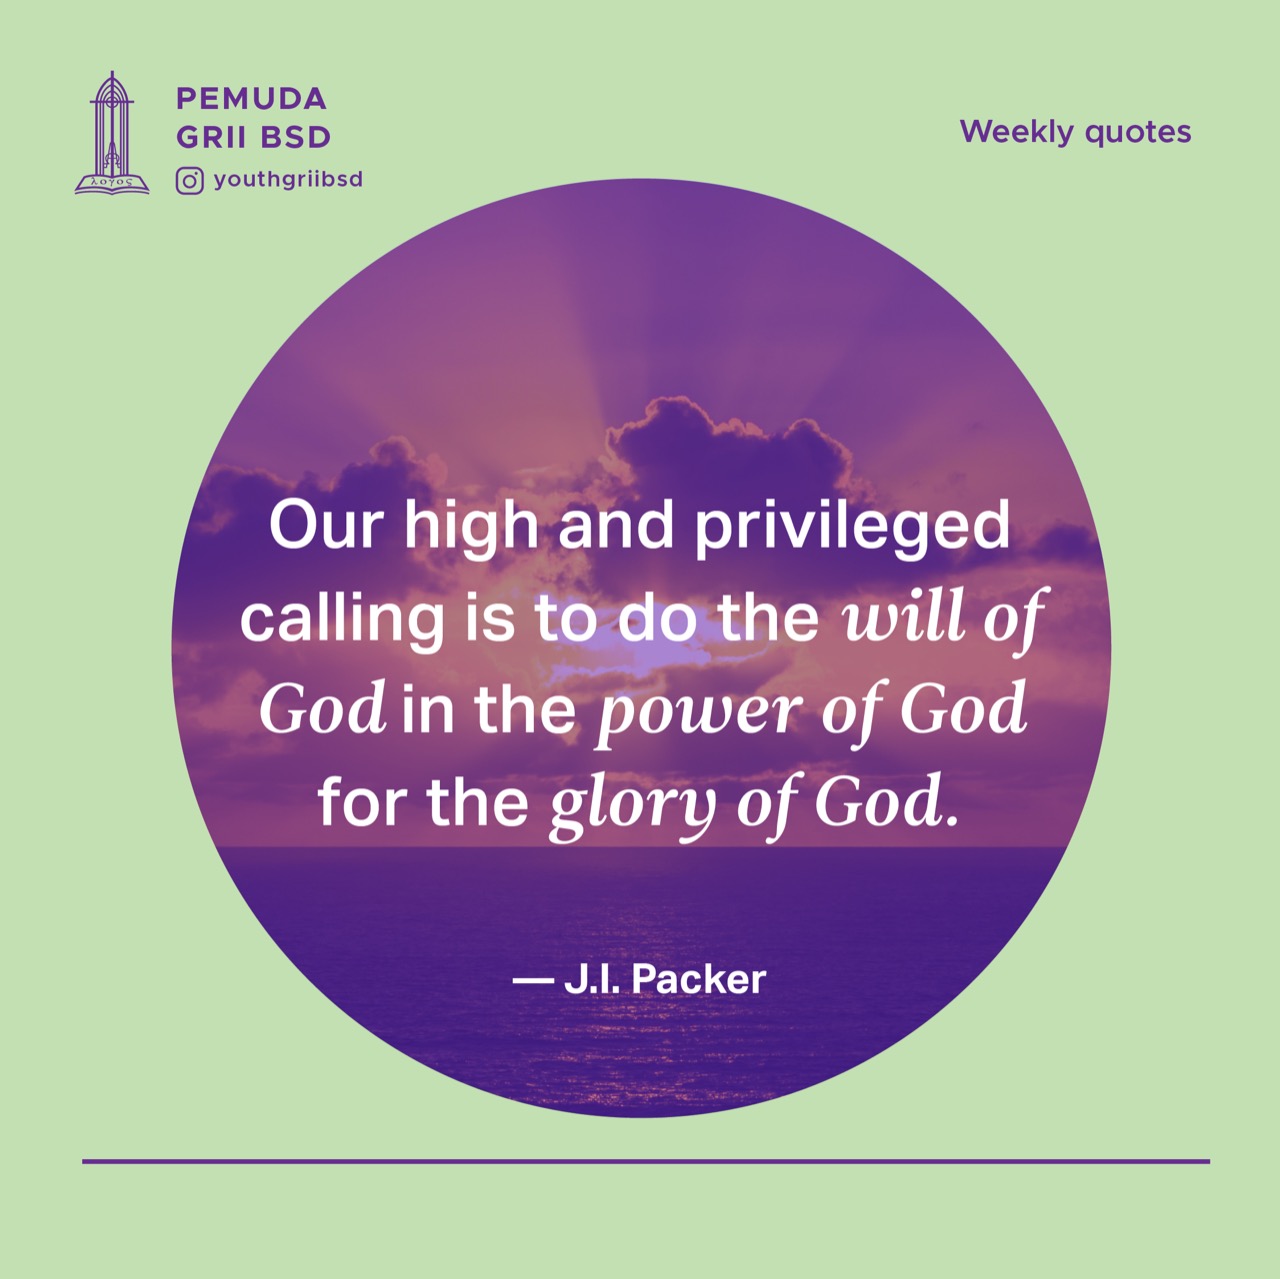 Our high and privileged calling is to do the will of God in the power of God for the Glory of God.